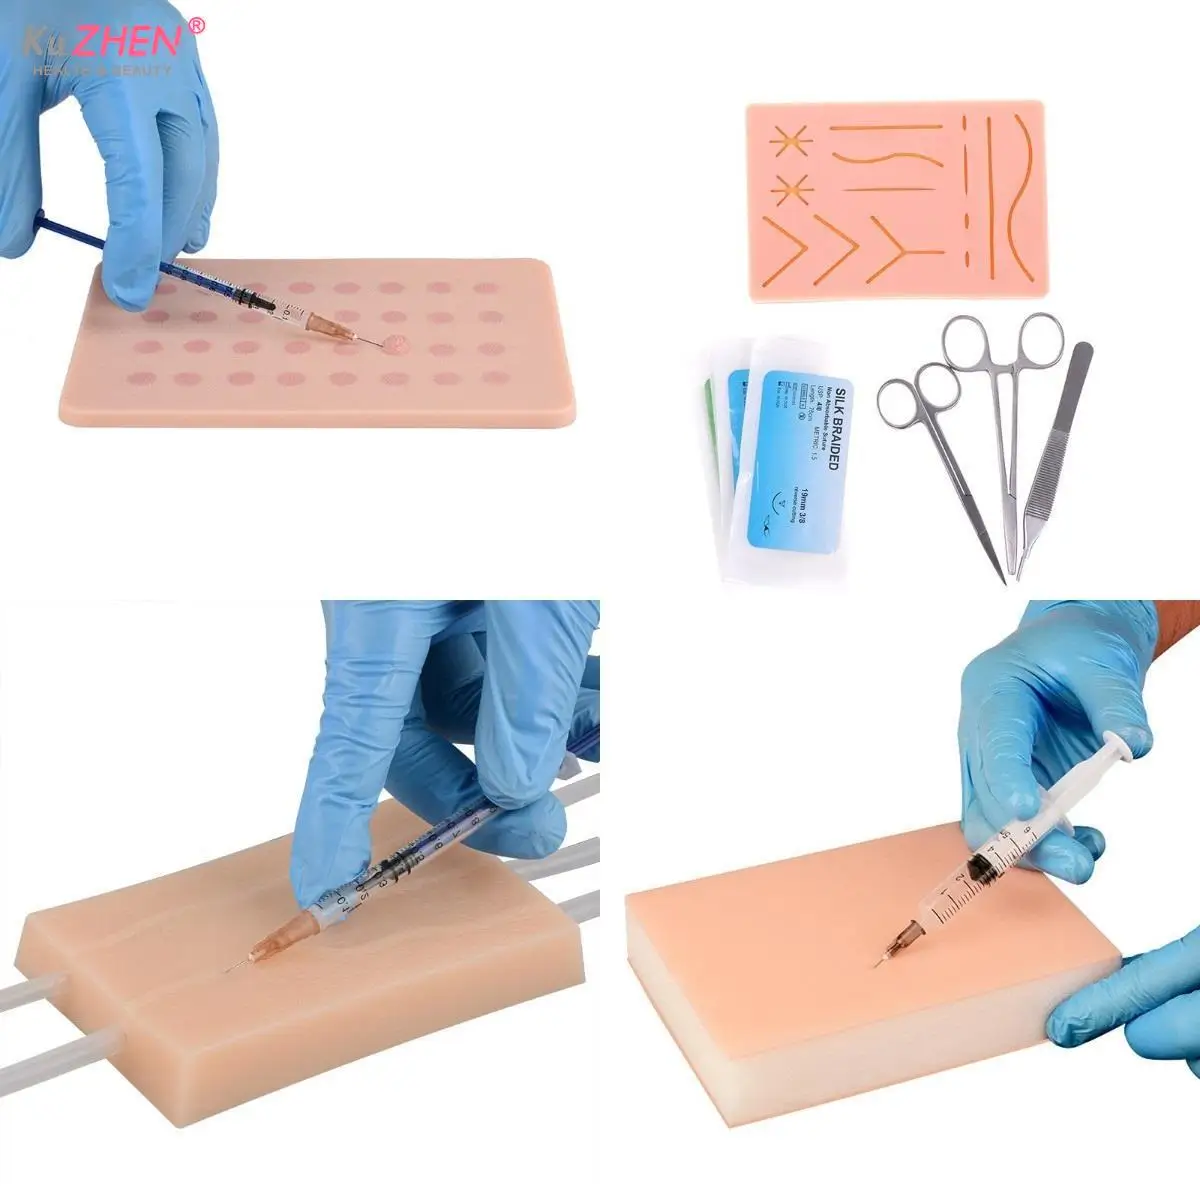 

Venipuncture IV Injection Training Pad Human Skin Suture Model Y/4 Vein Imbedded 3 Skin Layers Injection Practice Silicone Model